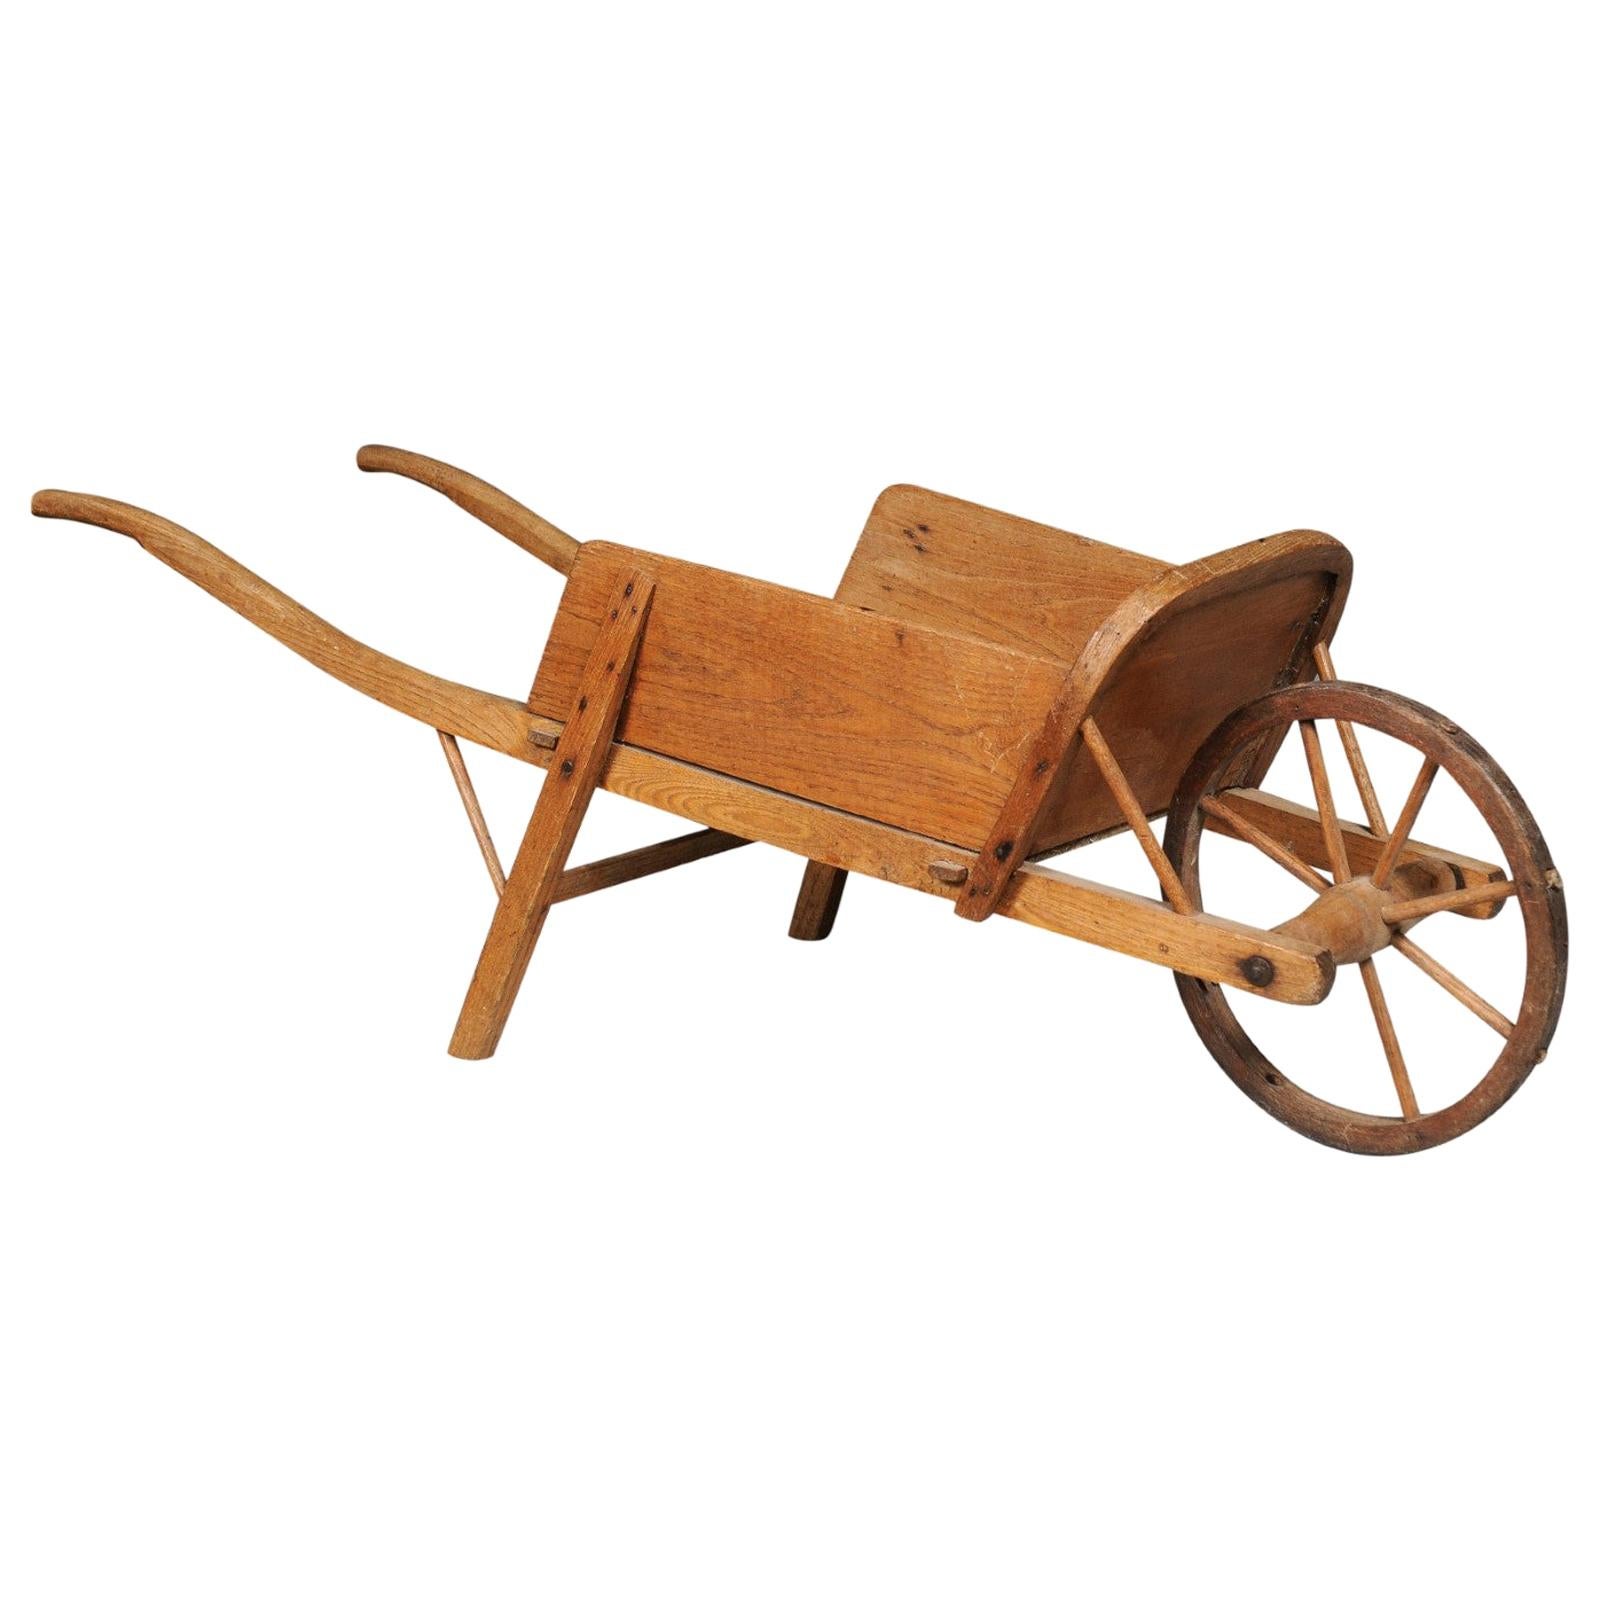 French 19th Century Rustic Wooden Child's Wheelbarrow with Curving Handles